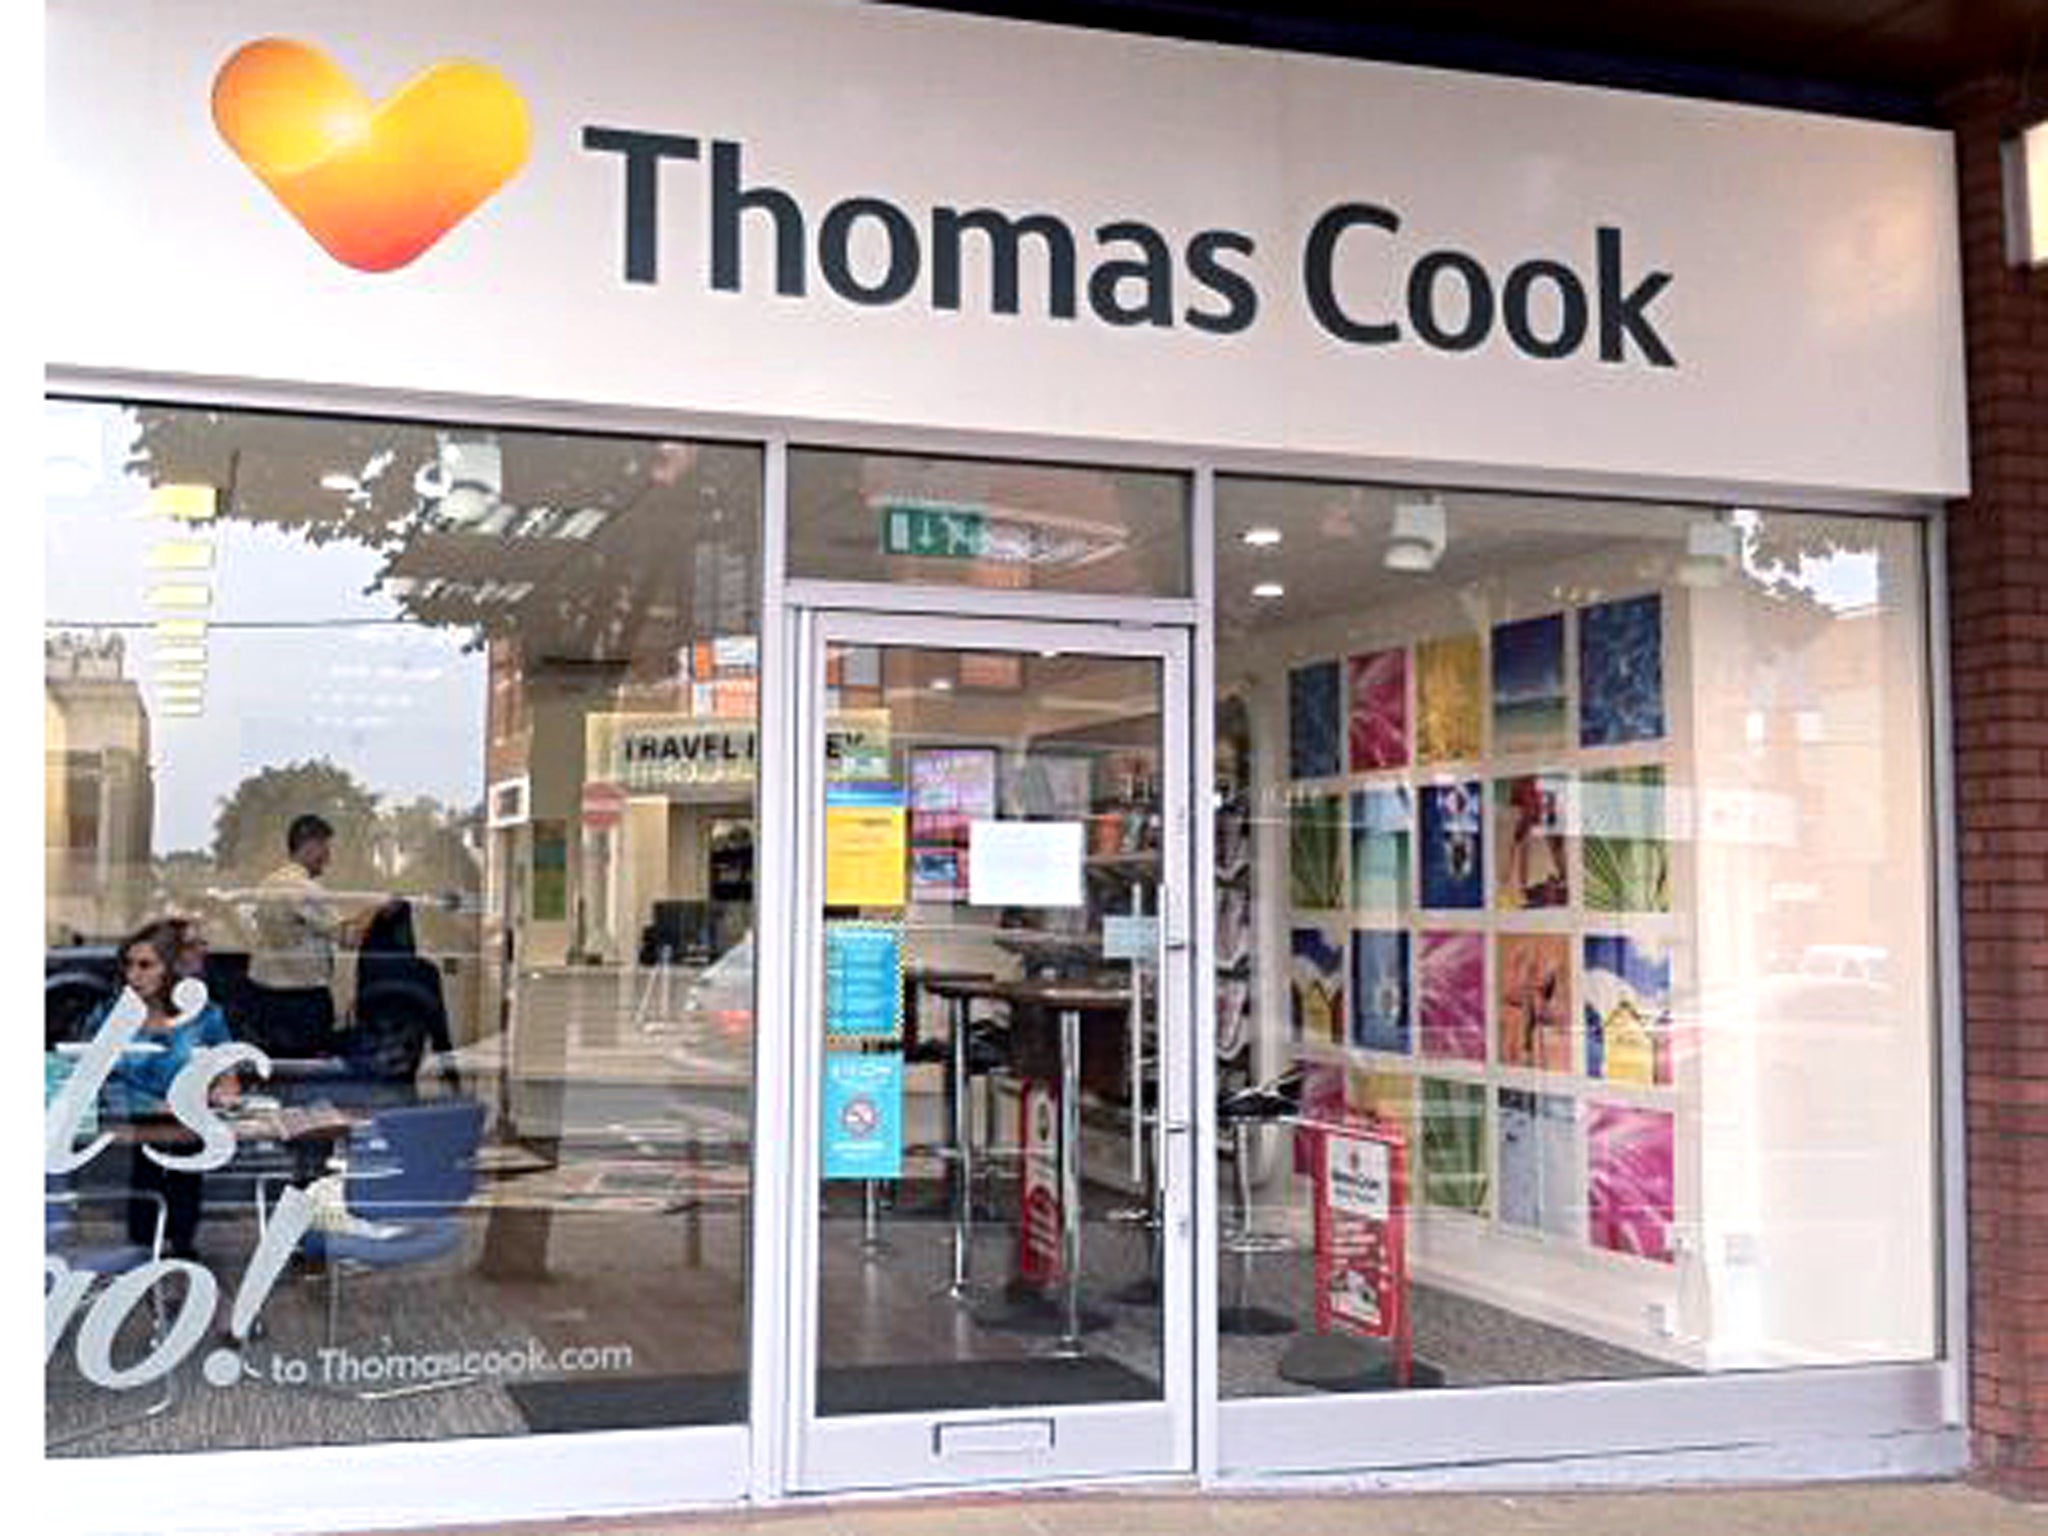 Brand new: Thomas Cook's logo on a high street store